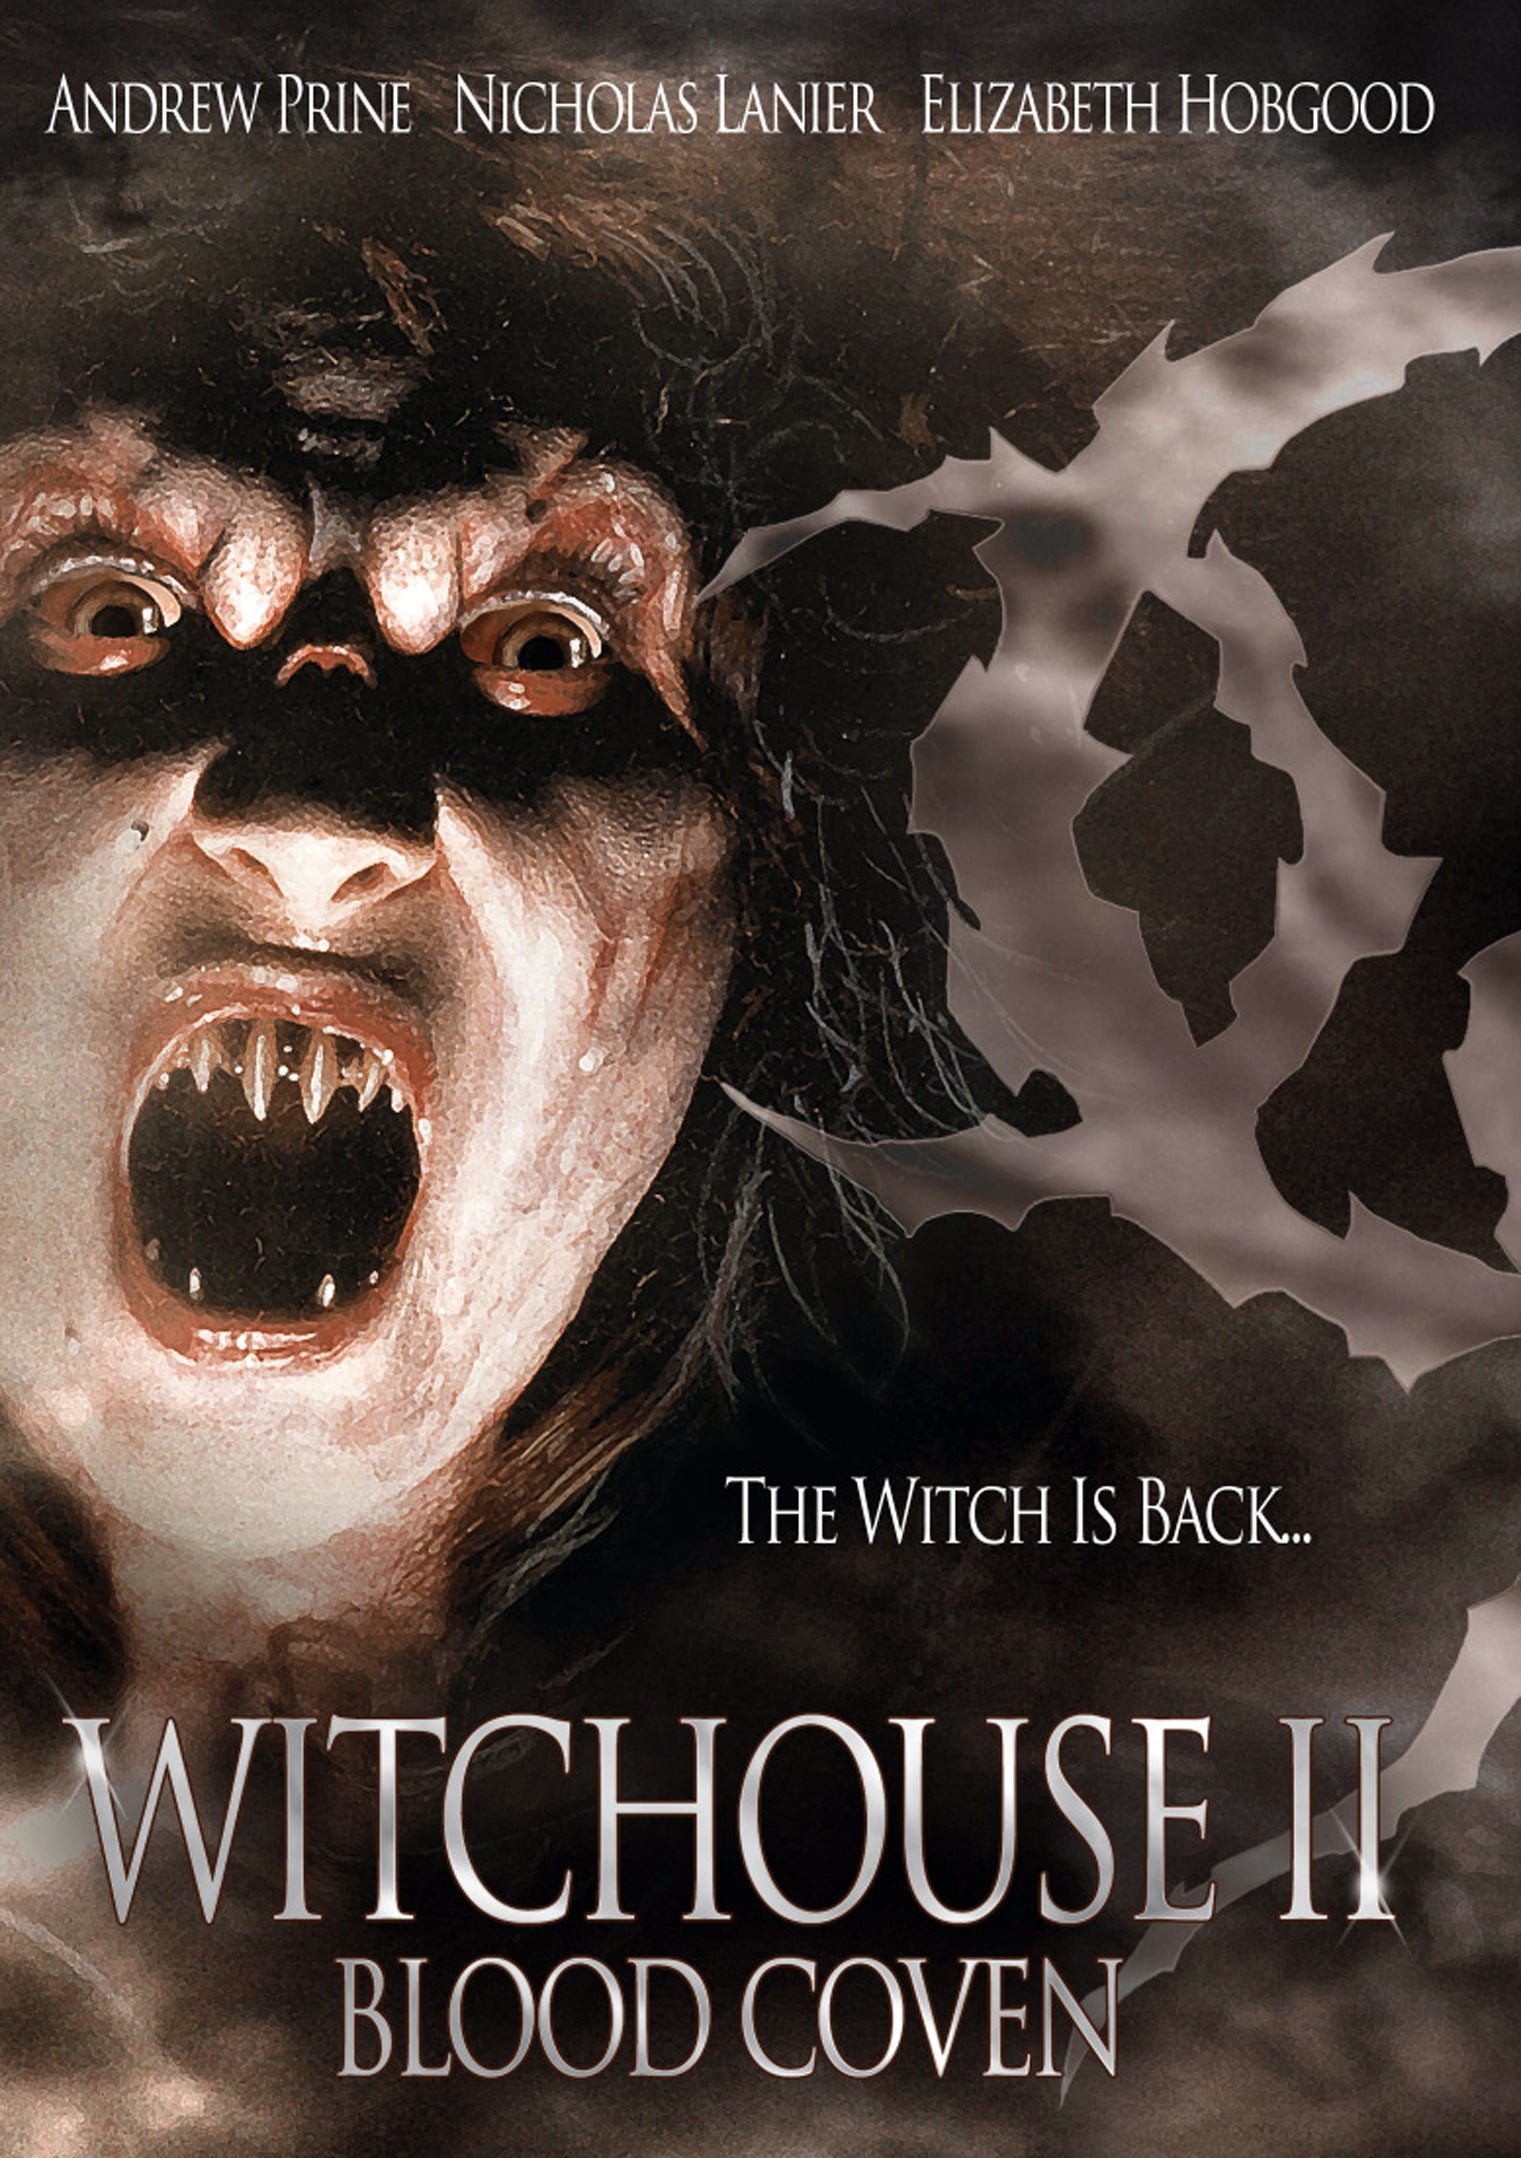 WITCHOUSE II: BLOOD COVEN DVD